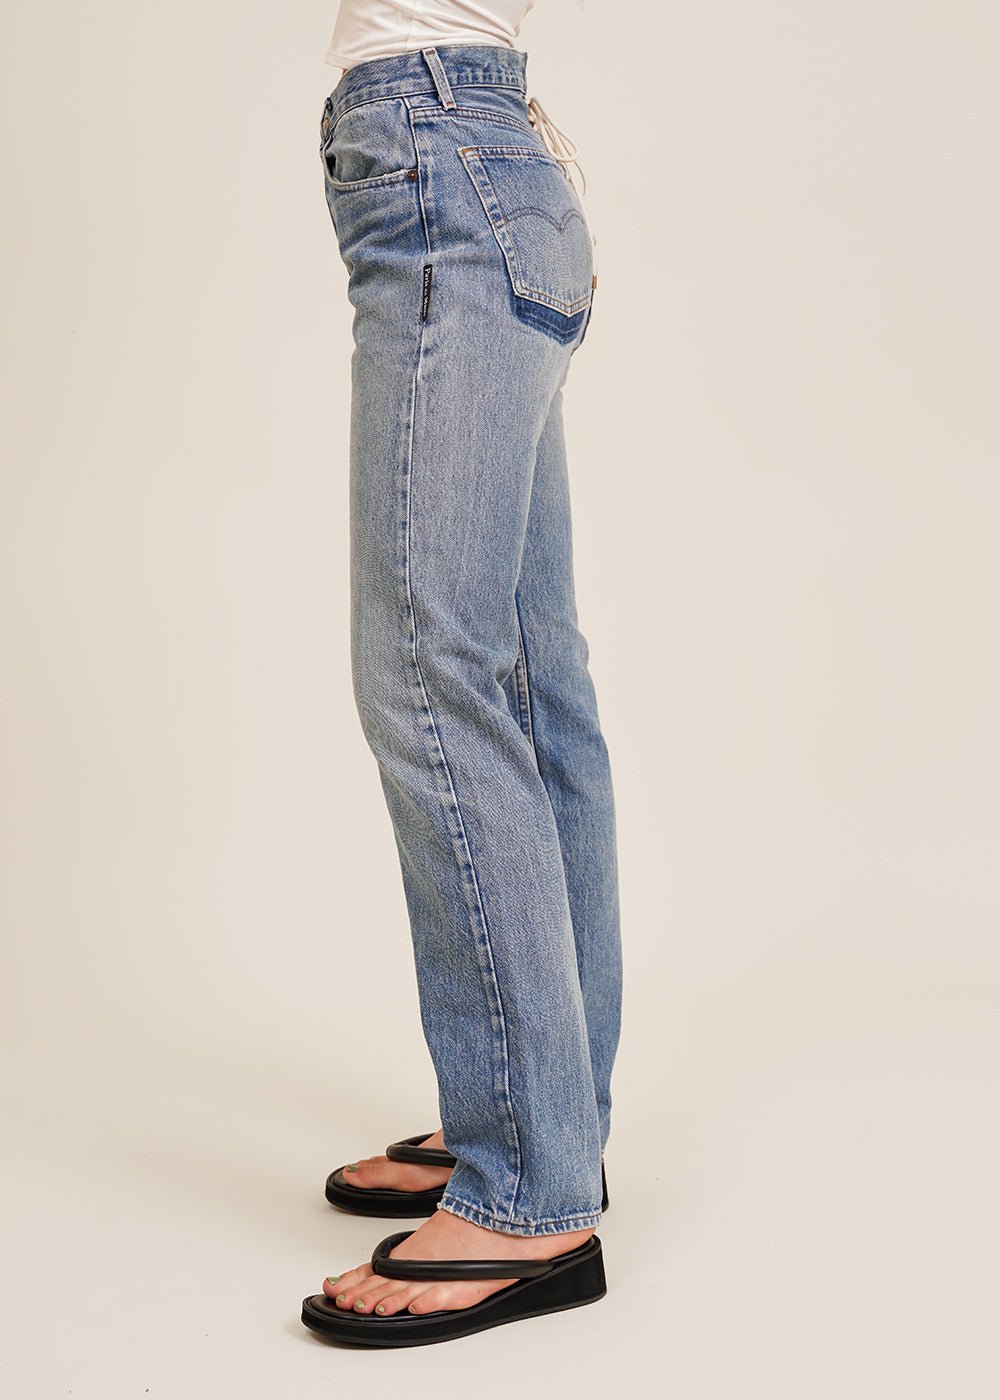 Paris RE Made Vintage Back Eyelet Jeans - New Classics Studios Sustainable Ethical Fashion Canada